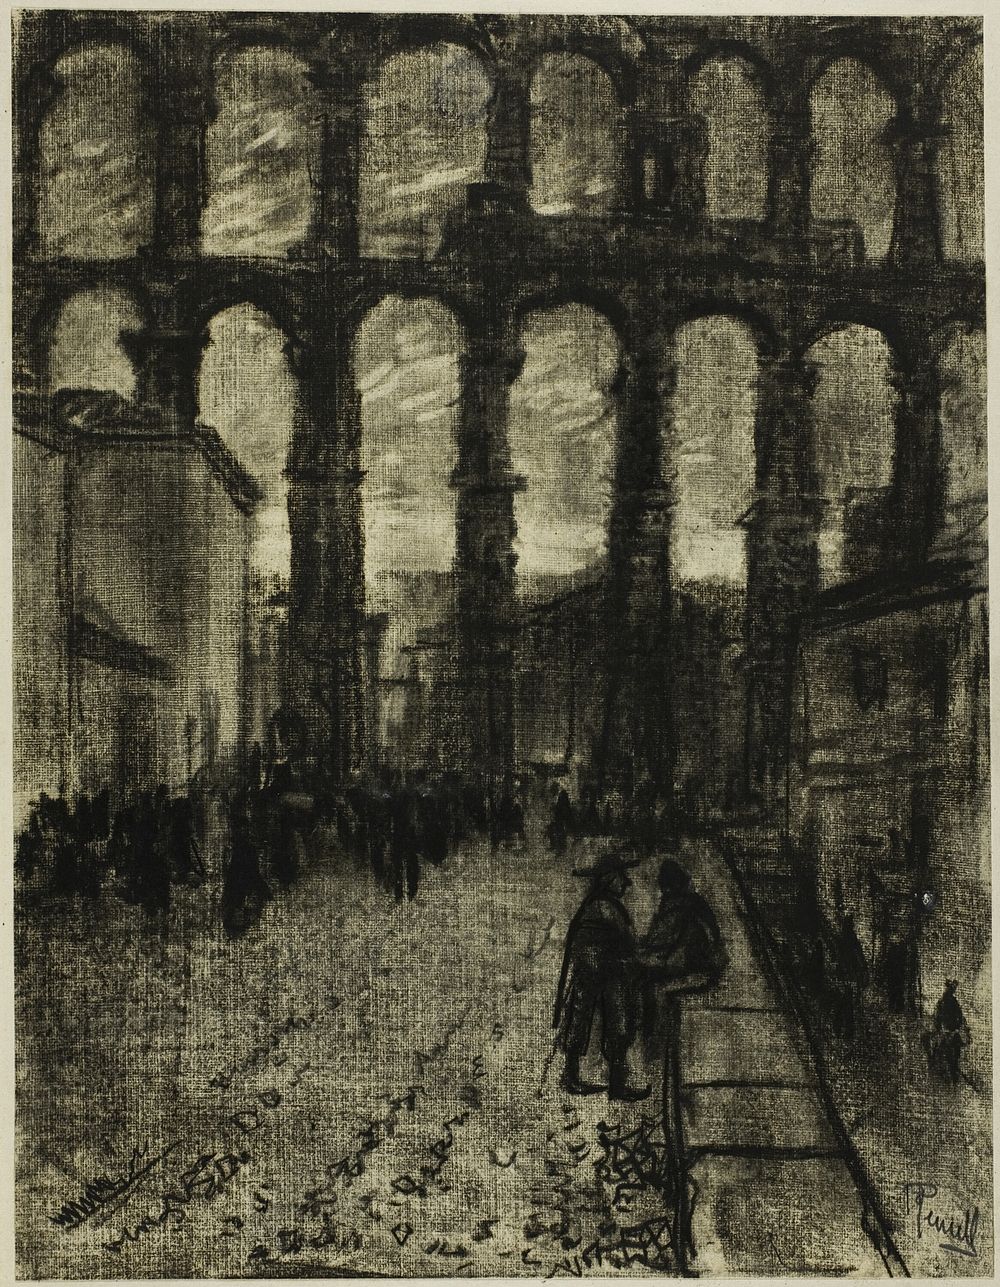 Segovia, The Aqueduct from Market by Joseph Pennell